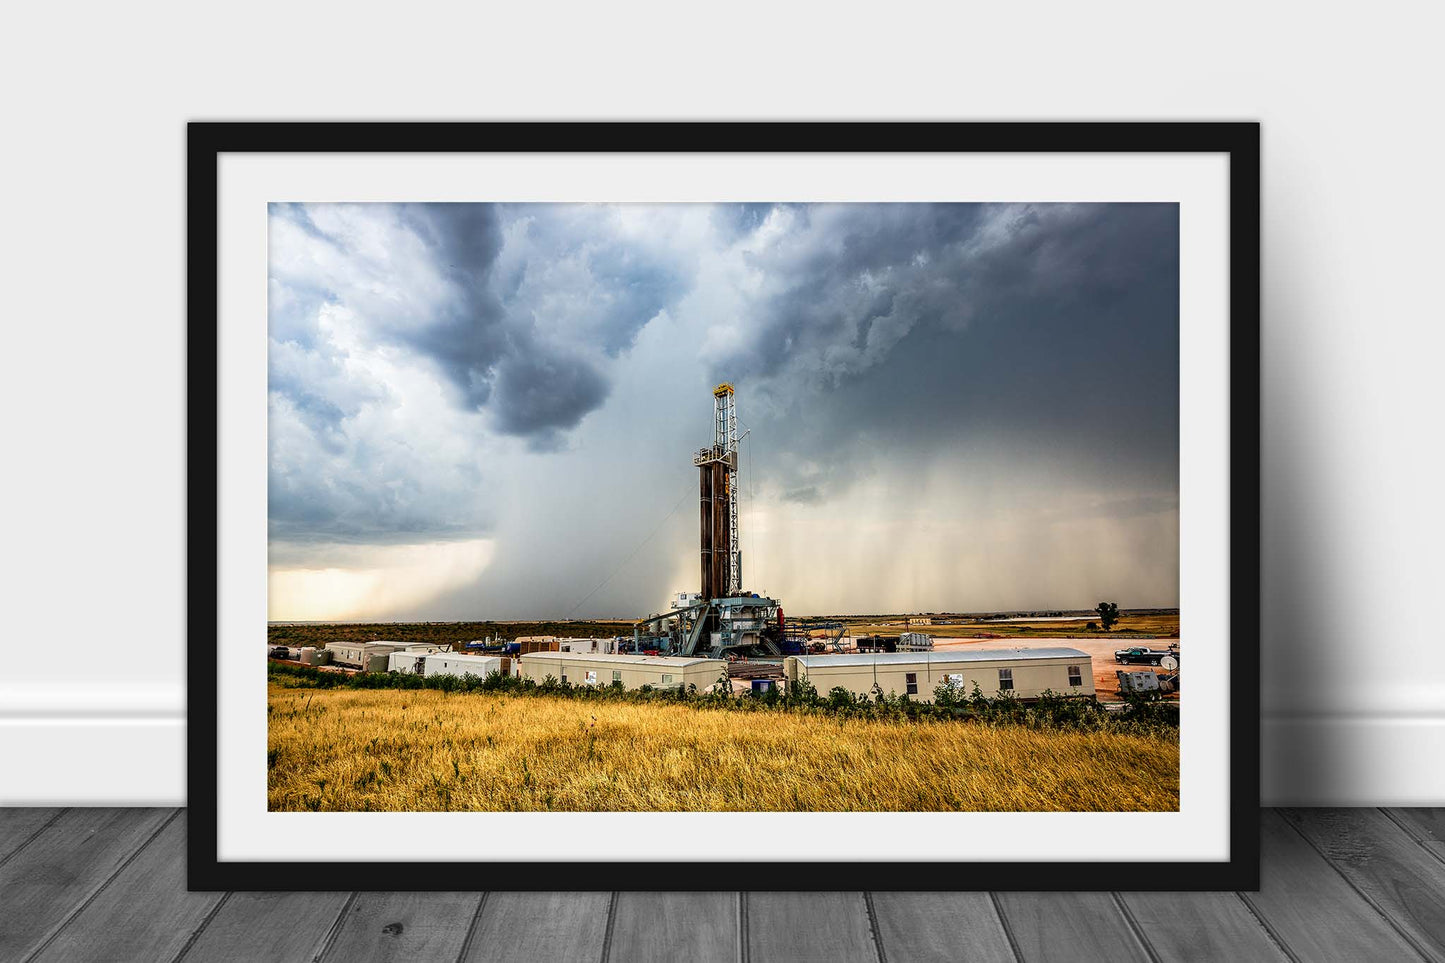 Framed and matted oilfield print of a drilling rig and thunderstorm on a stormy summer day on the plains of Oklahoma by Sean Ramsey of Southern Plains Photography.